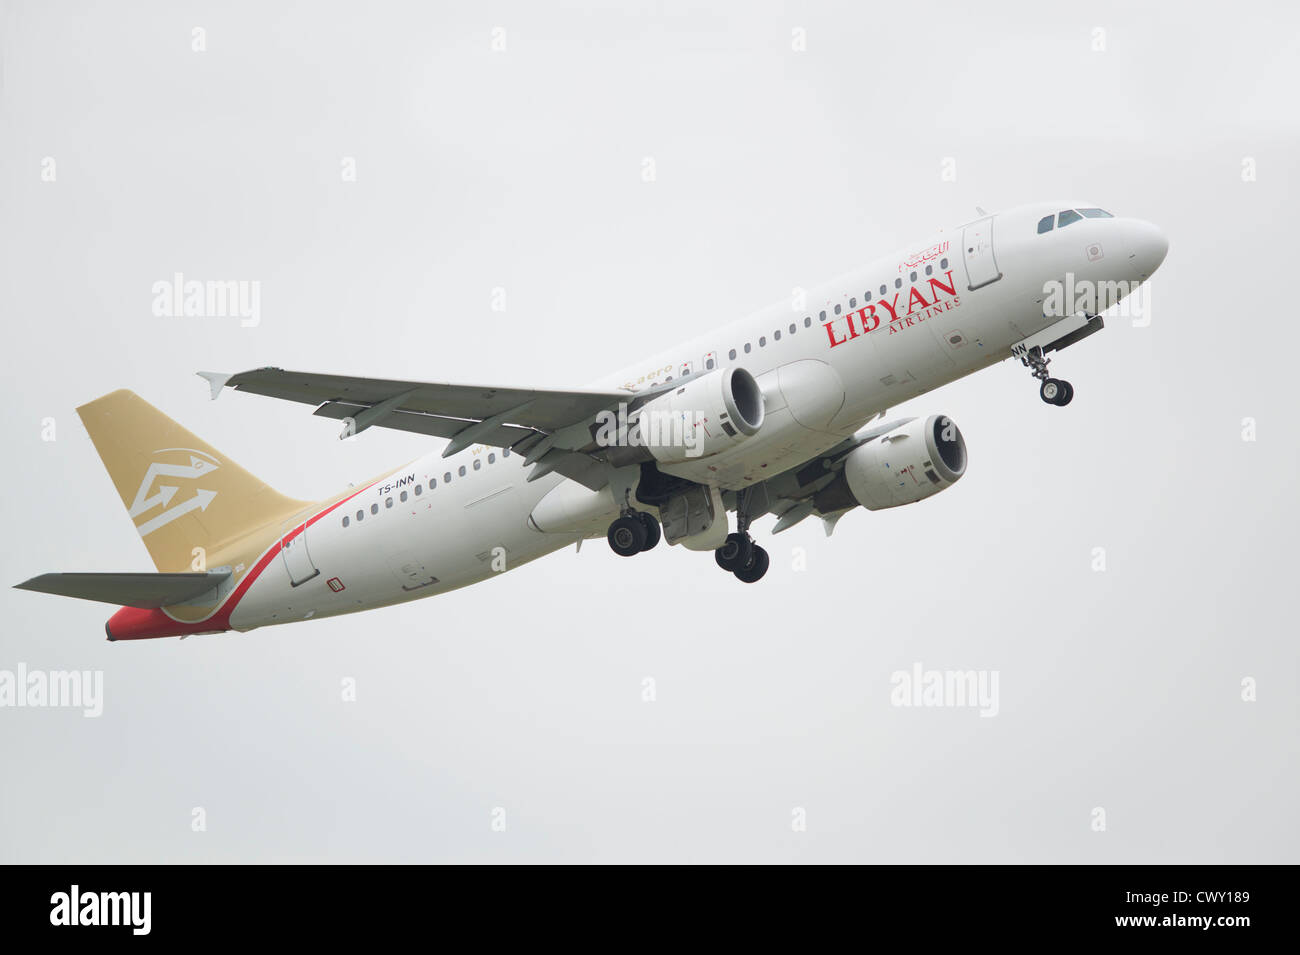 A Libyan Airlines Airbus A320 taking off from Manchester International Airport (Editorial use only) Stock Photo